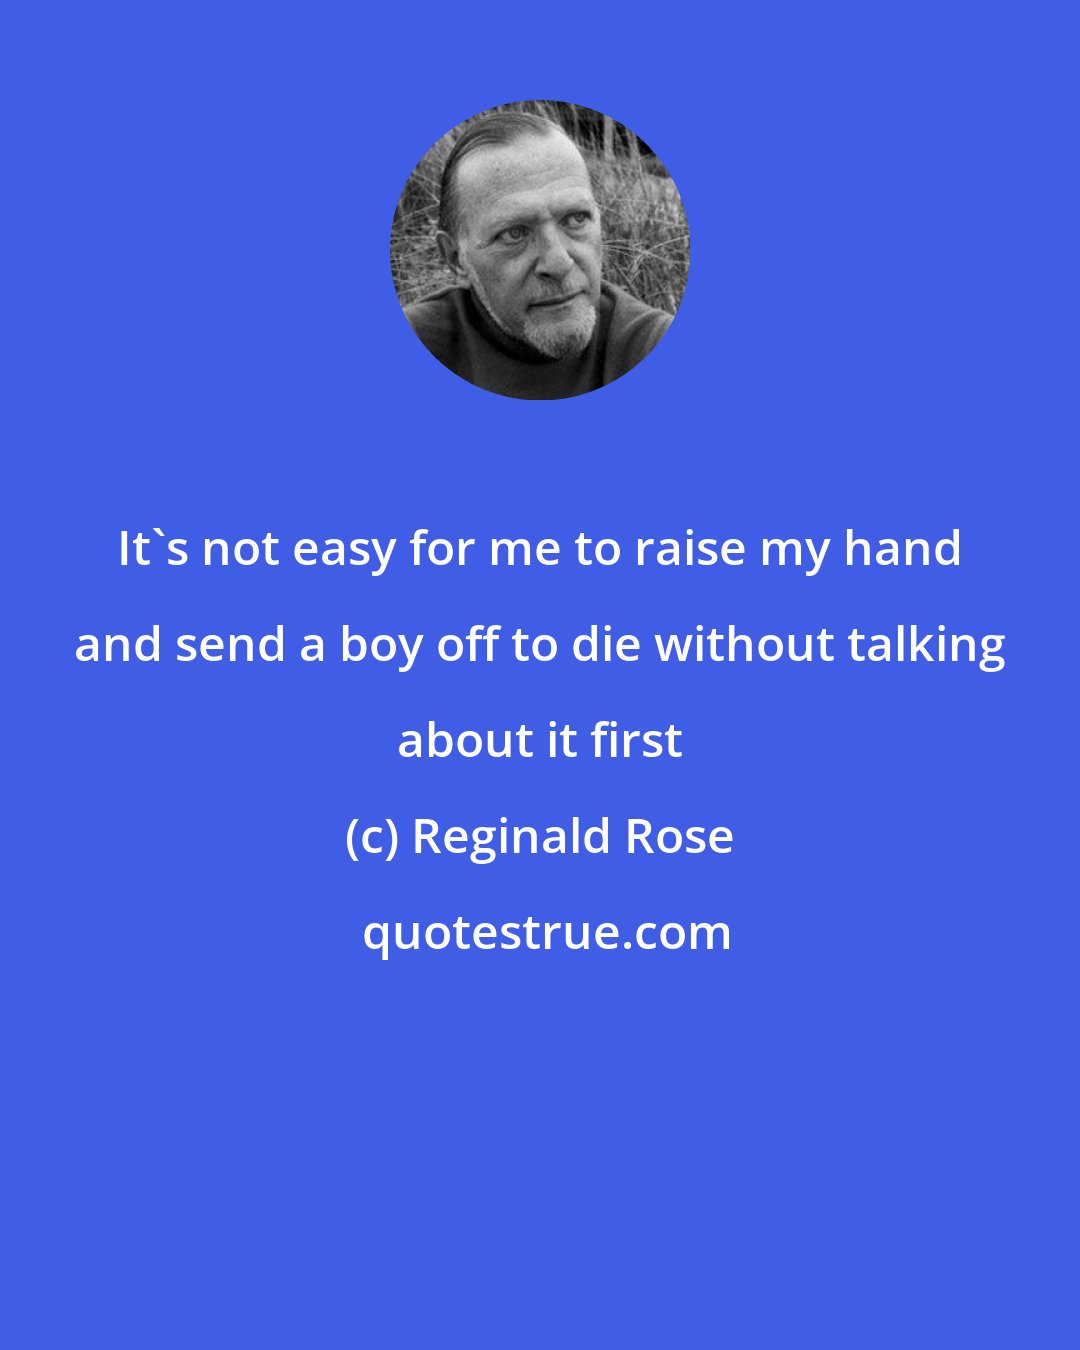 Reginald Rose: It's not easy for me to raise my hand and send a boy off to die without talking about it first